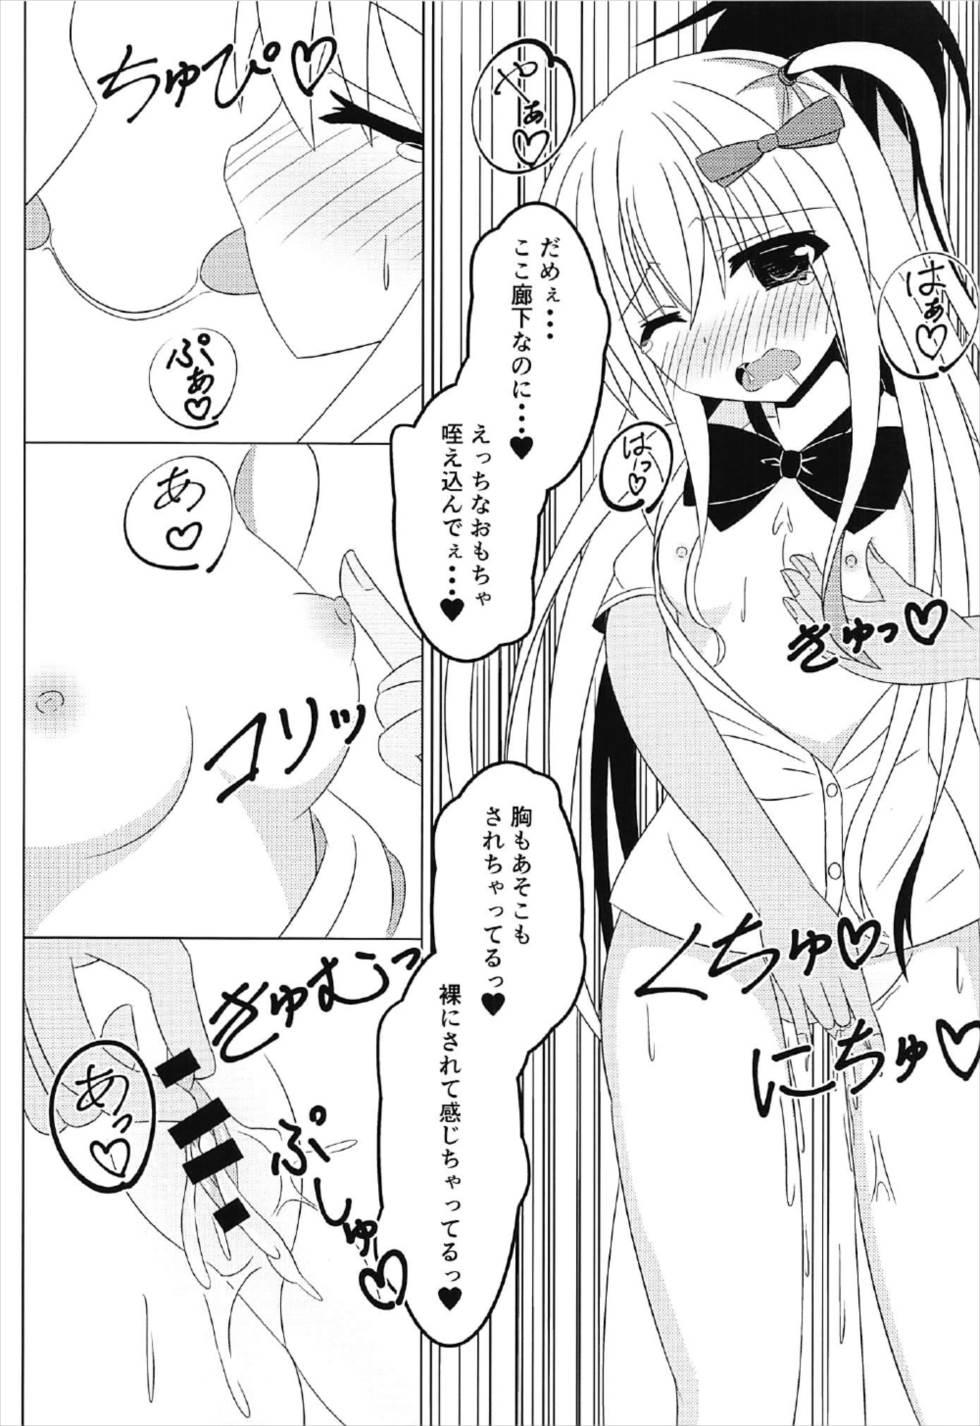 Swallowing 茉莉と授業を抜け出して - Girl friend beta Huge - Page 9